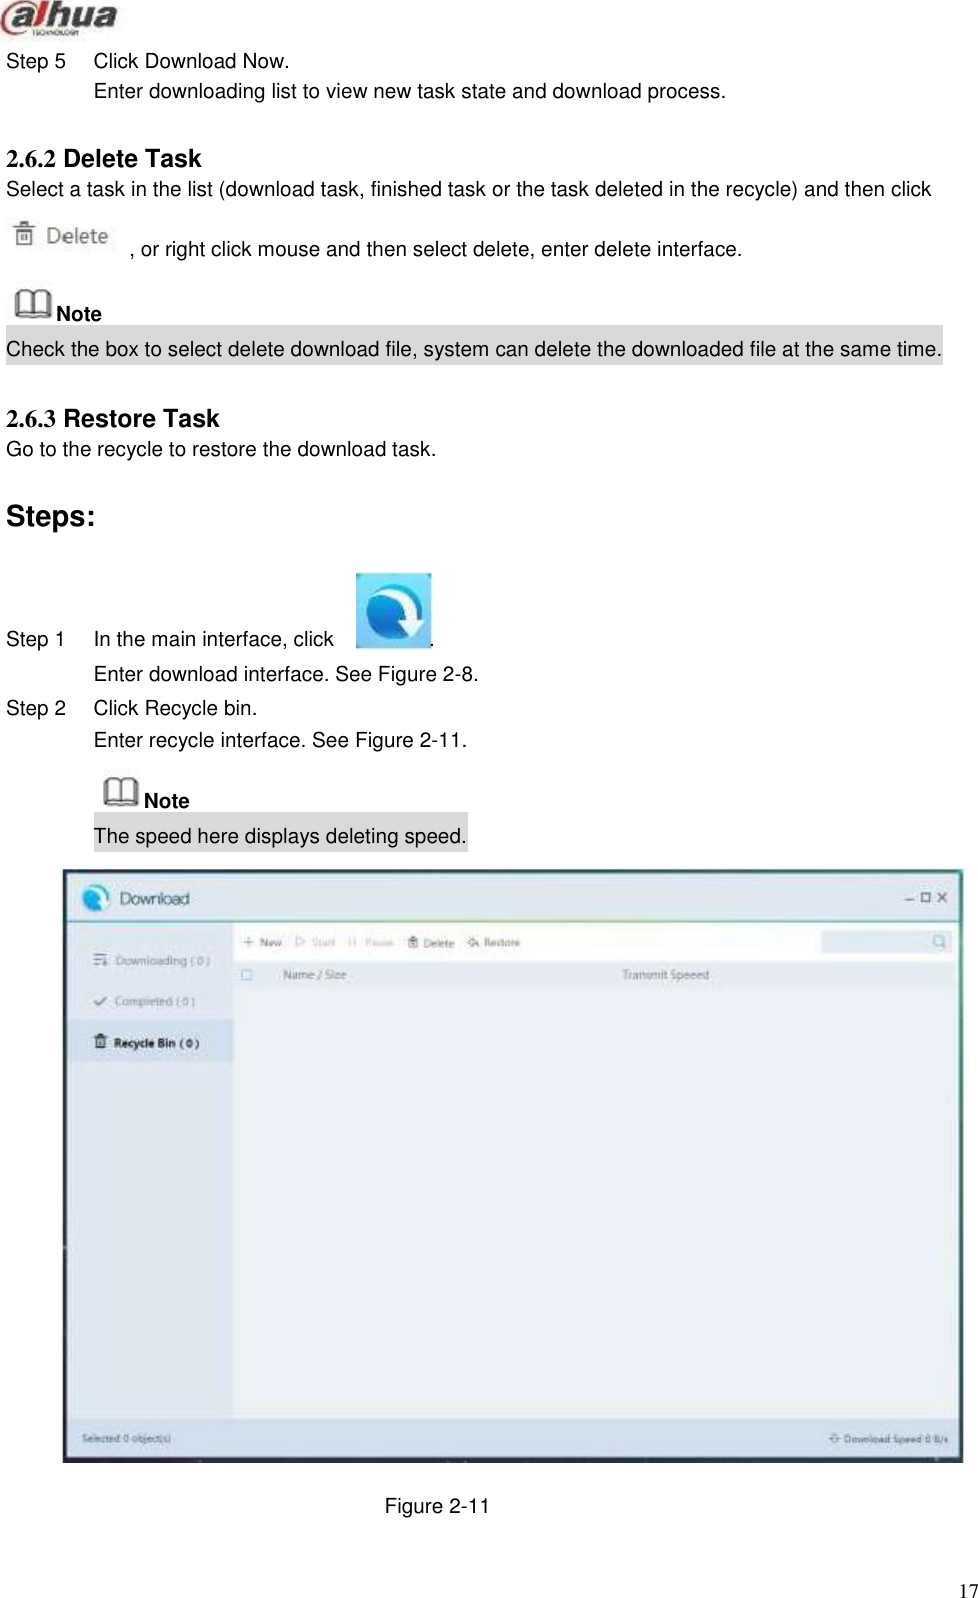                   Step 5       Click Download Now. Enter downloading list to view new task state and download process.   2.6.2 Delete Task Select a task in the list (download task, finished task or the task deleted in the recycle) and then click  , or right click mouse and then select delete, enter delete interface.   Note Check the box to select delete download file, system can delete the downloaded file at the same time.   2.6.3 Restore Task Go to the recycle to restore the download task.   Steps:     Step 1     In the main interface, click     . Enter download interface. See Figure 2-8. Step 2  Click Recycle bin. Enter recycle interface. See Figure 2-11.  Note The speed here displays deleting speed.                               Figure 2-11                                           17